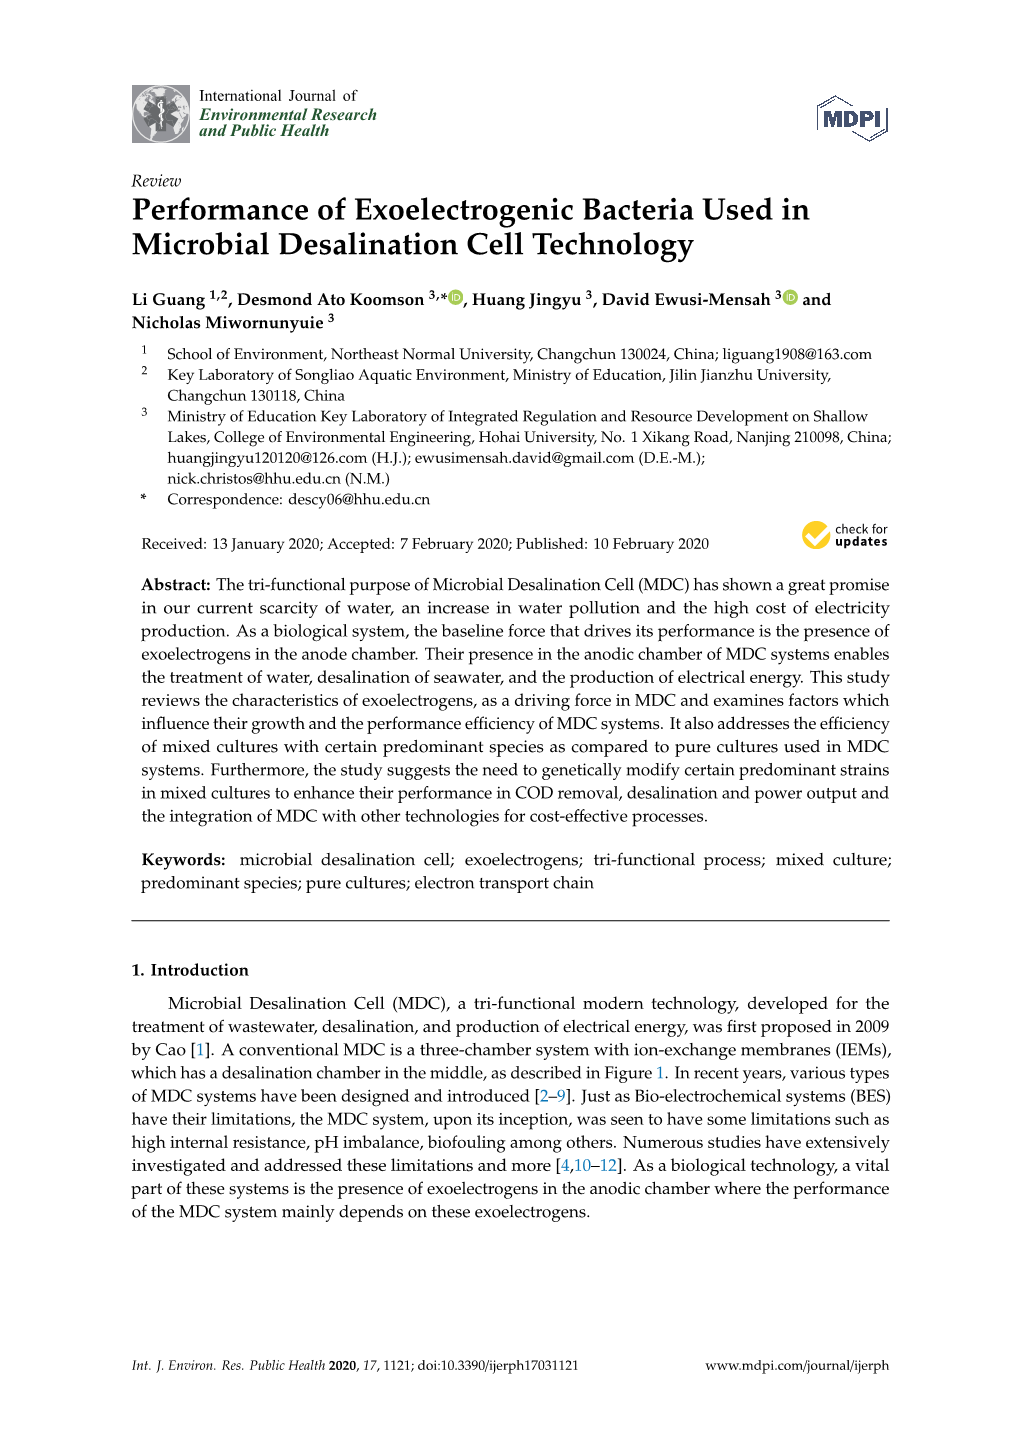 Performance of Exoelectrogenic Bacteria Used in Microbial Desalination Cell Technology